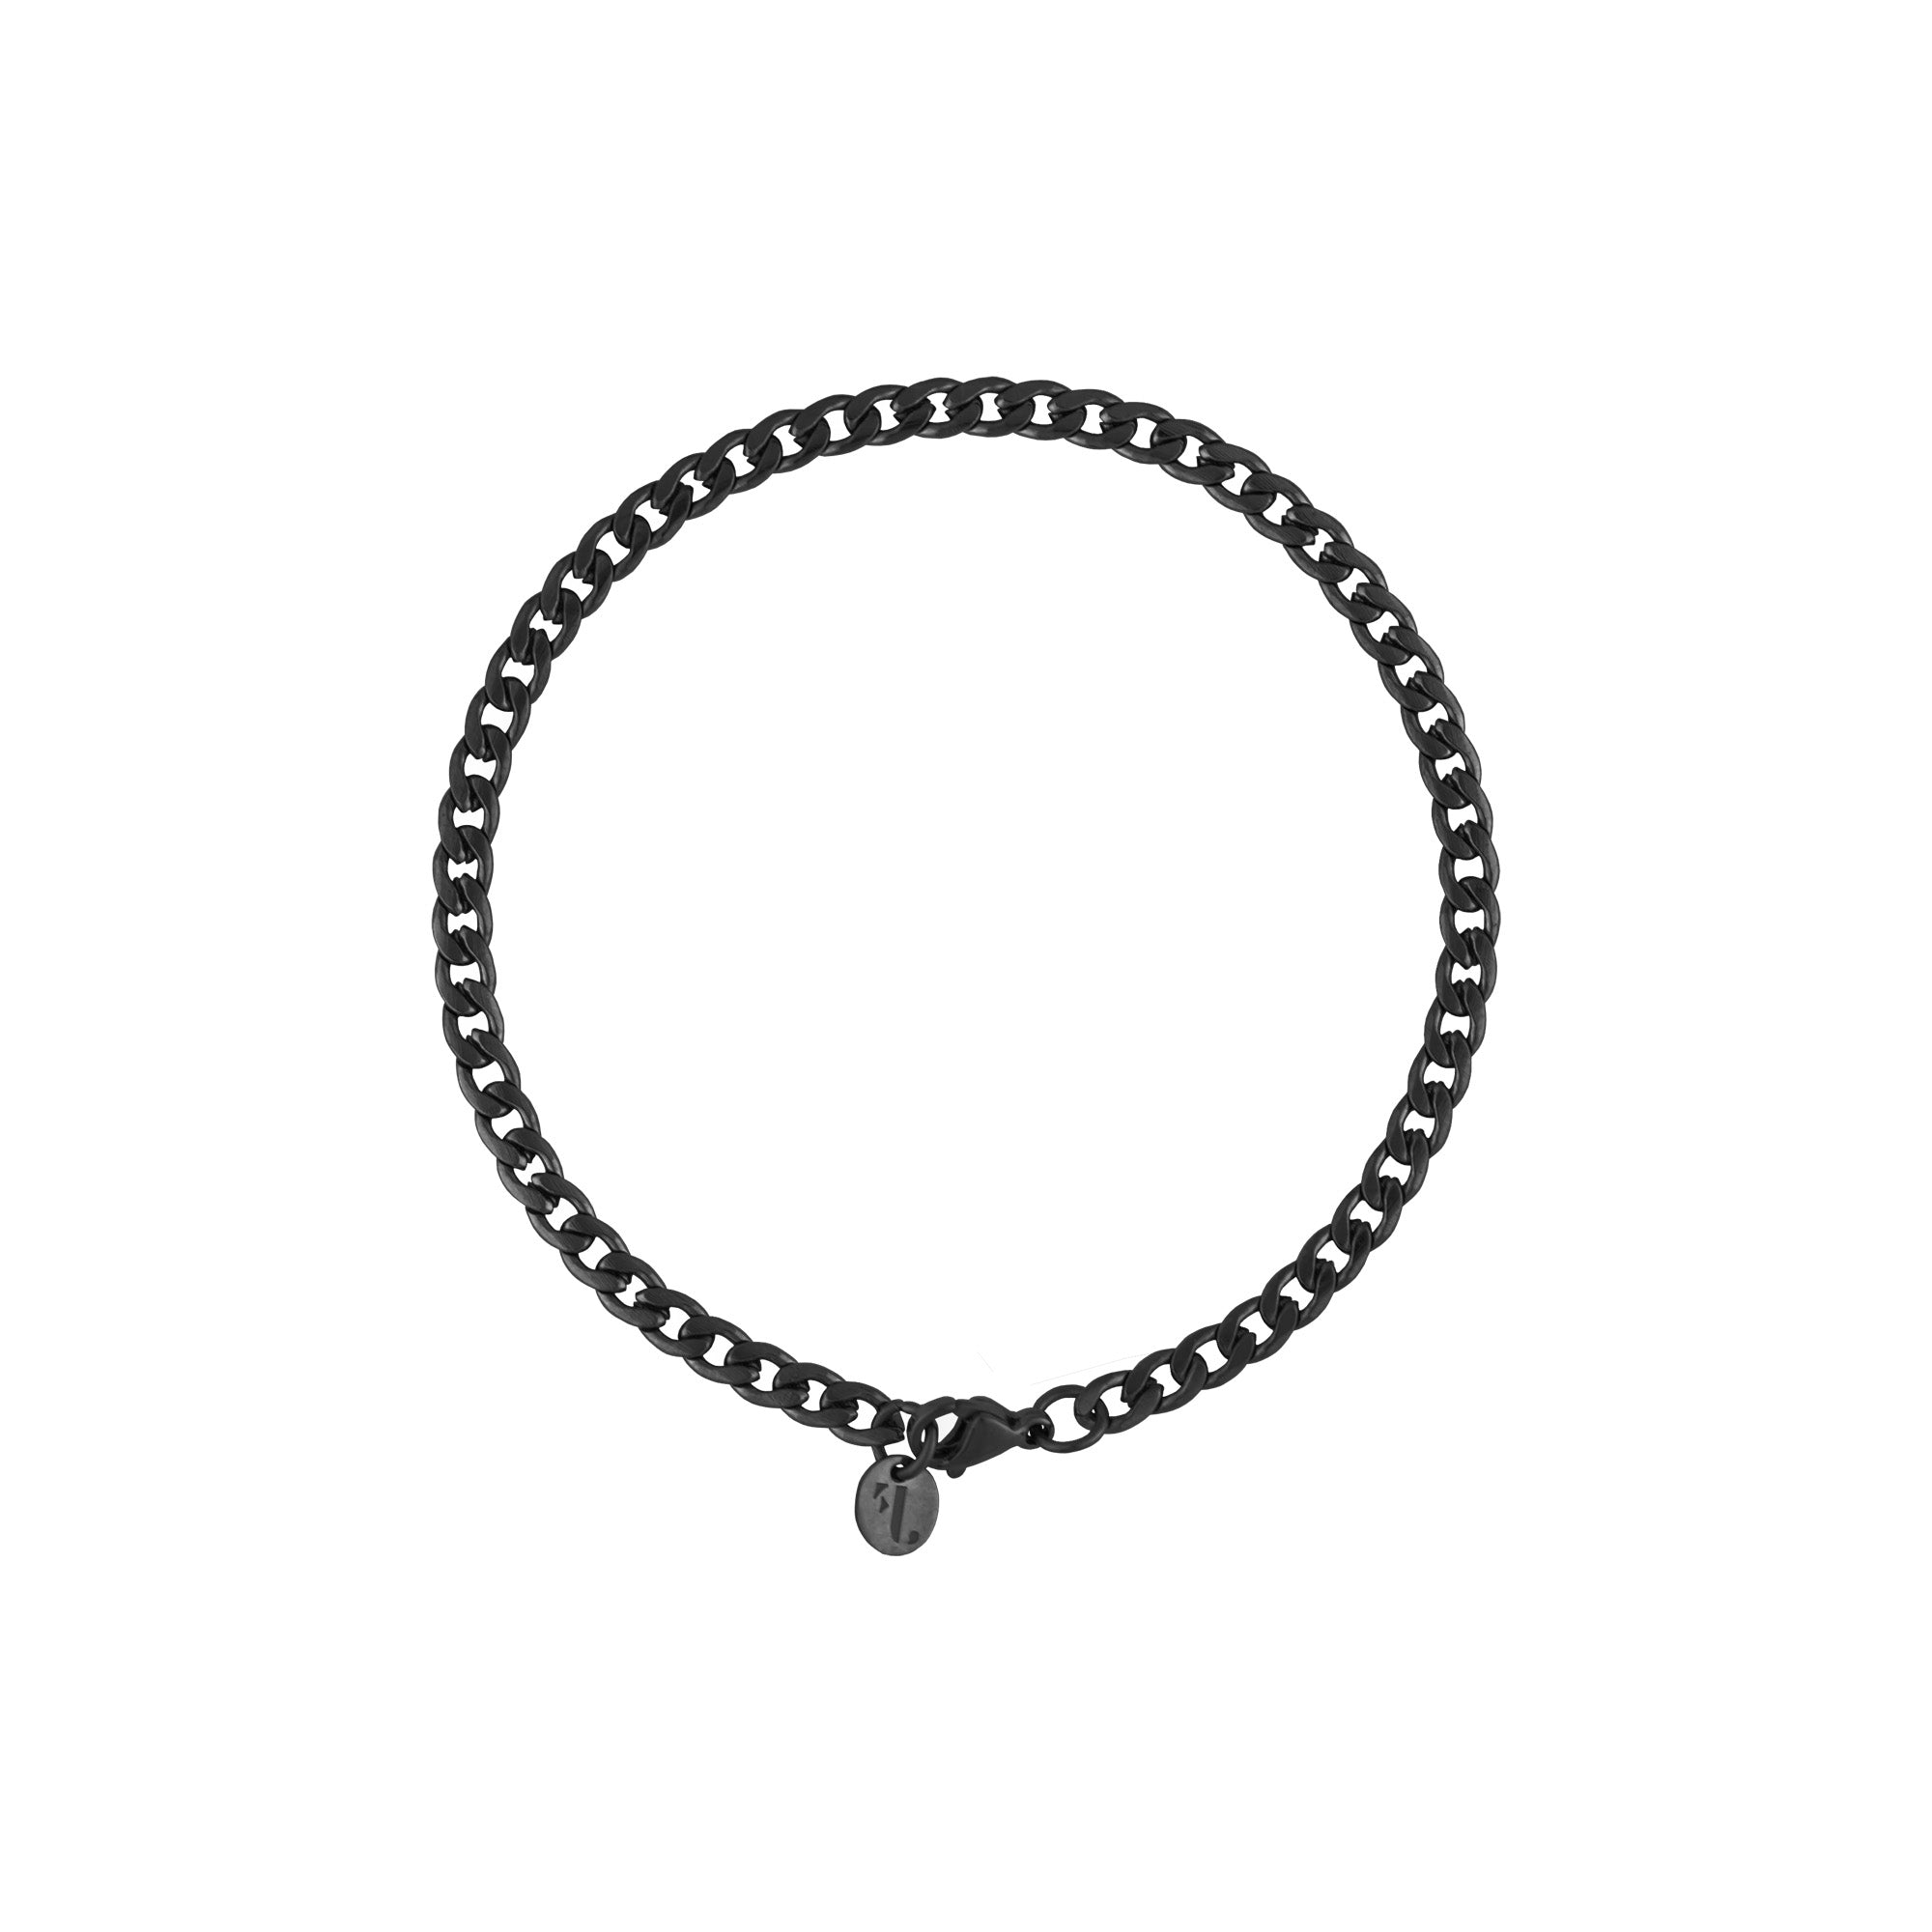 Mirik men's bracelet by Five Jwlry, designed with a 4mm flat wide woven Cuban link chain in black color, made from water-resistant 316L stainless steel. Offered in sizes 20cm and 22cm. Hypoallergenic and backed by a 2-year warranty.